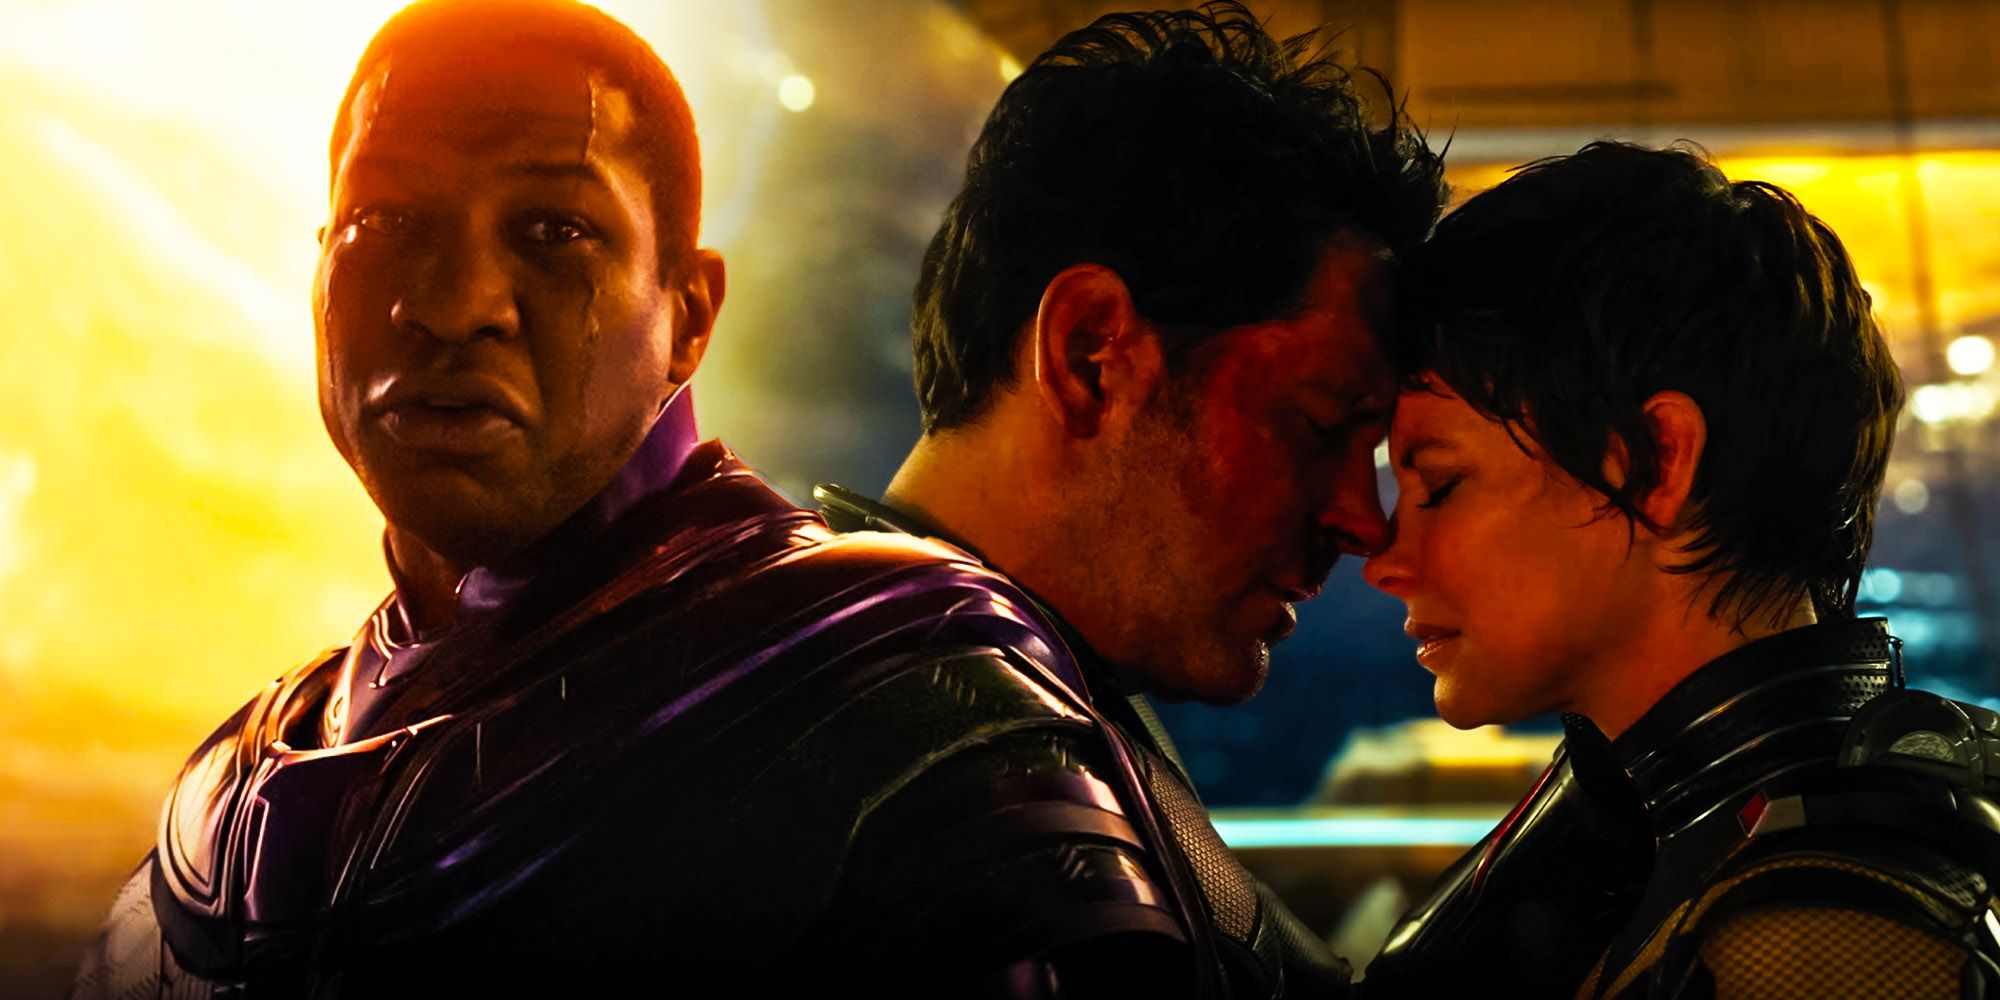 Split Image of Kang the Conqueror (Jonathan Majors) ready for battle; Scott Lang (Paul Rudd) and Hope van Dyne (Evangeline Lilly) touching foreheads in Ant-Man and the Wasp: Quantumania